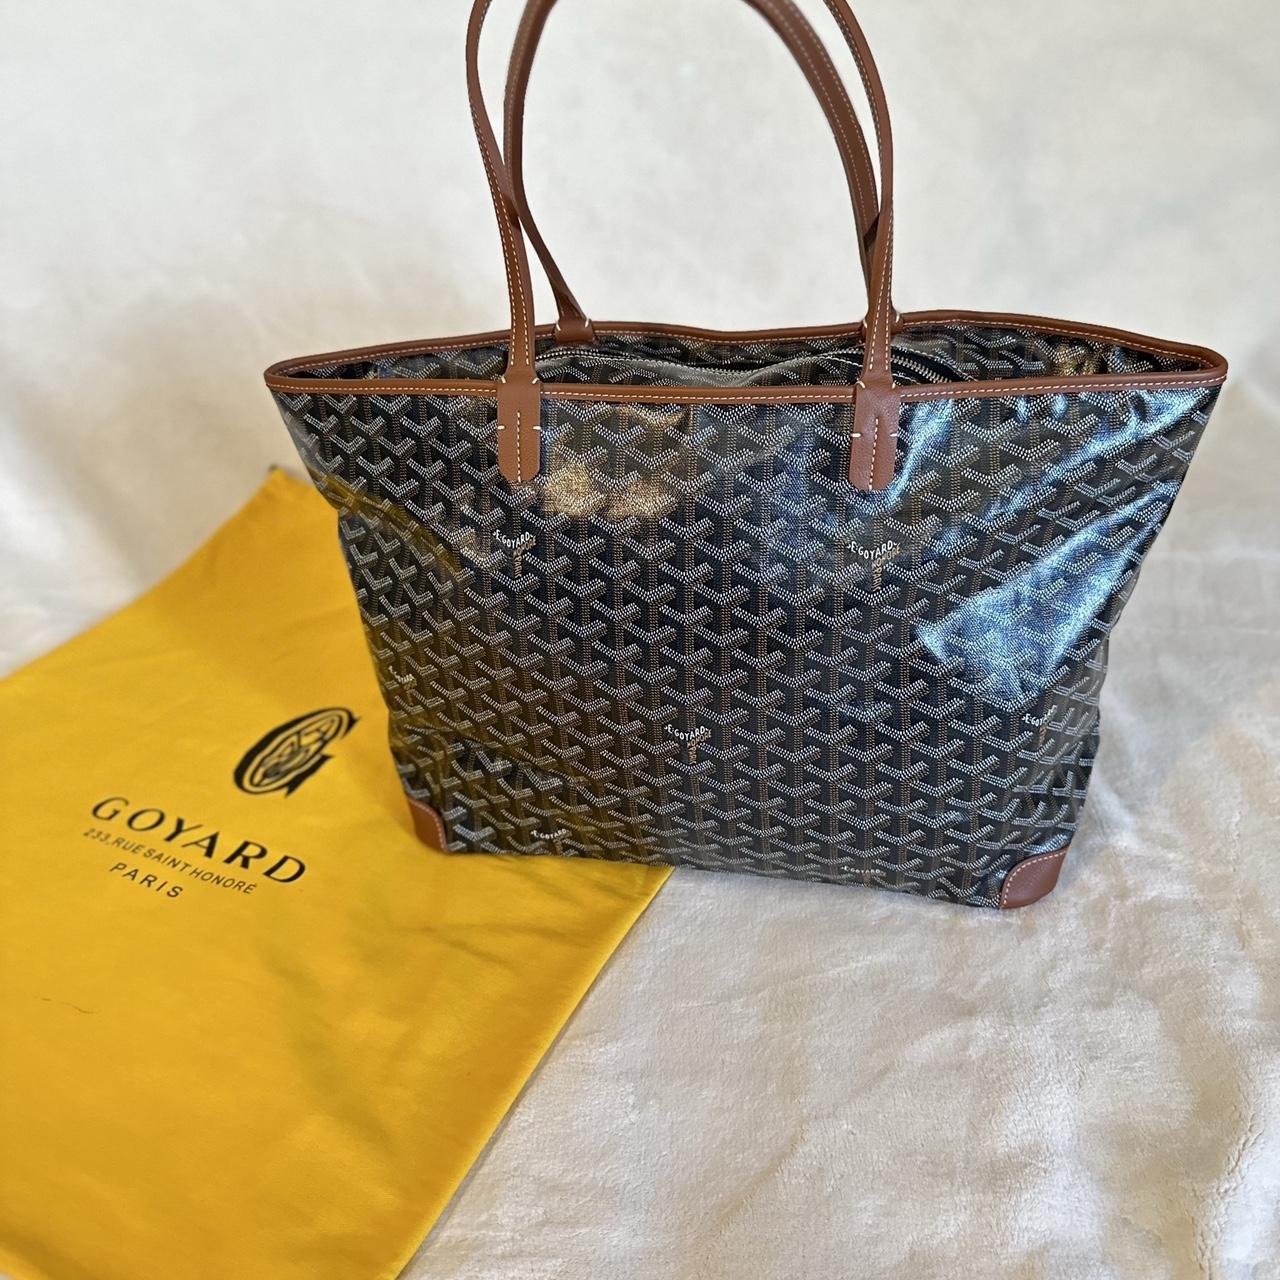 Black Goyard Tote I've had this for years, it's an - Depop